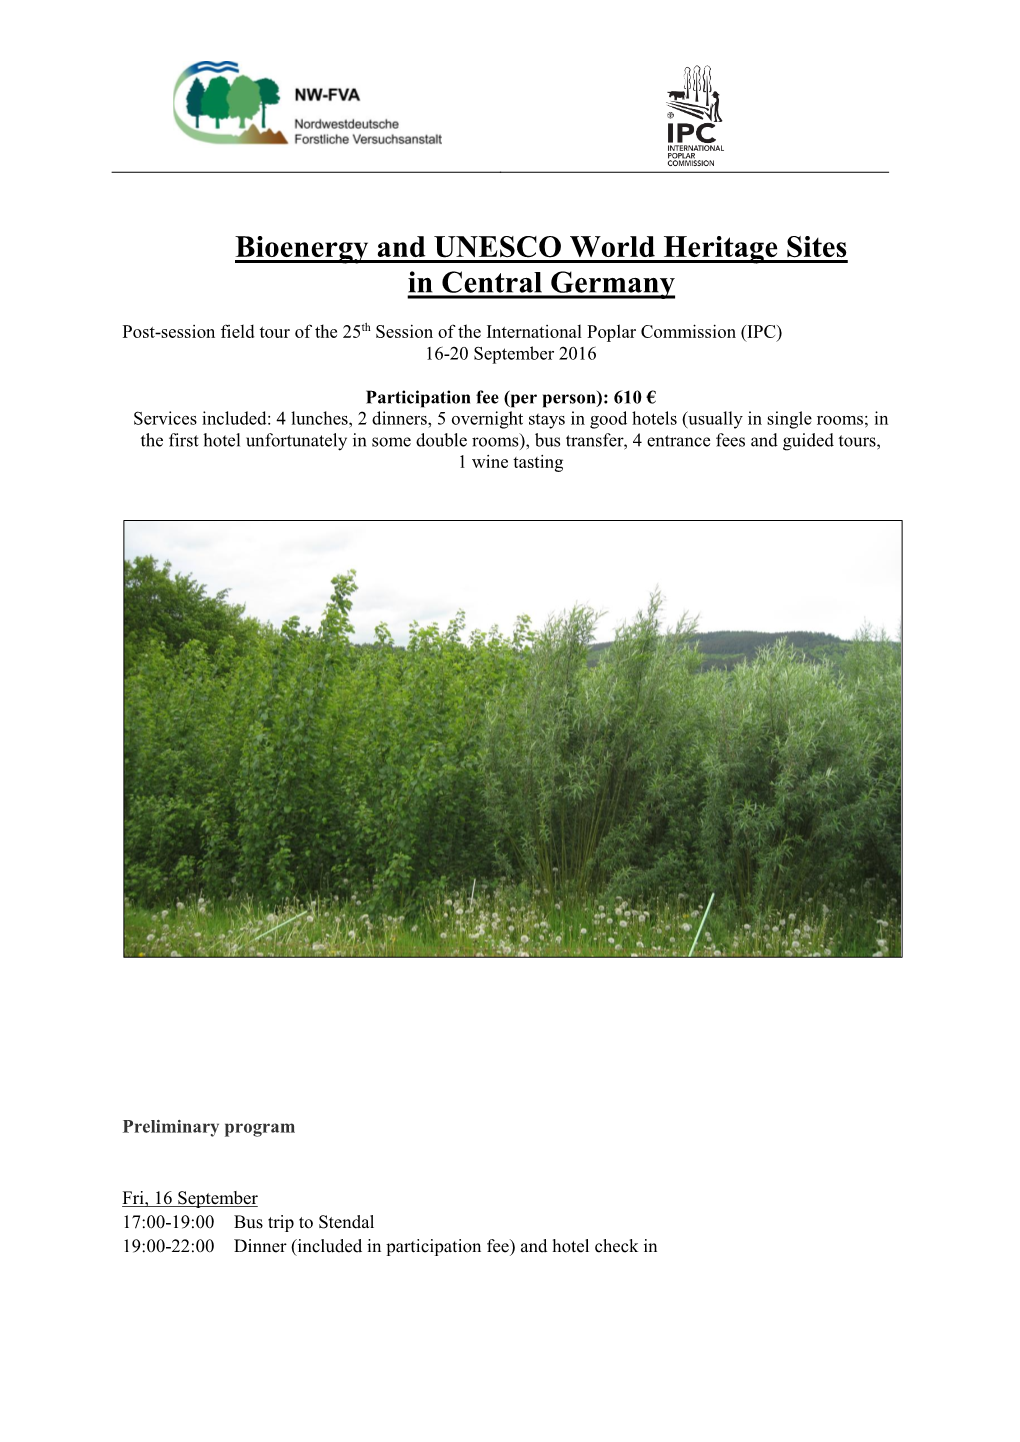 Bioenergy and UNESCO World Heritage Sites in Central Germany